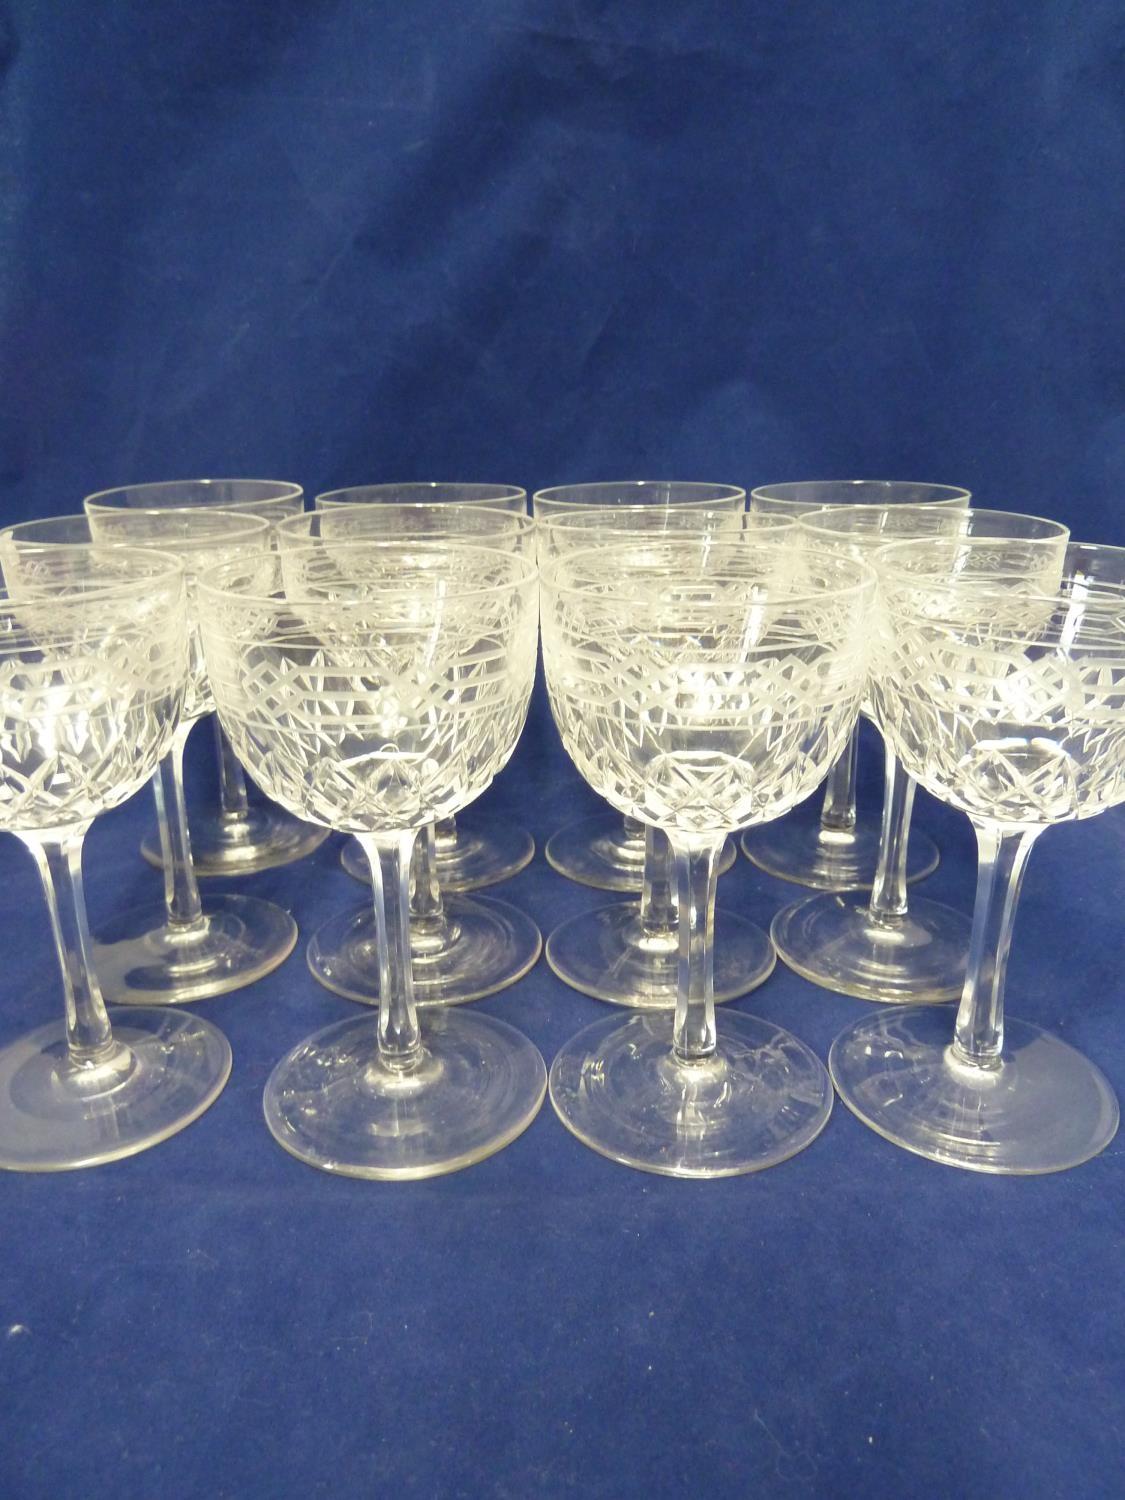 English Glass - A set of 12 port wine glasses, cut and engraved with a Gothic knot border in Pugin - Image 2 of 5